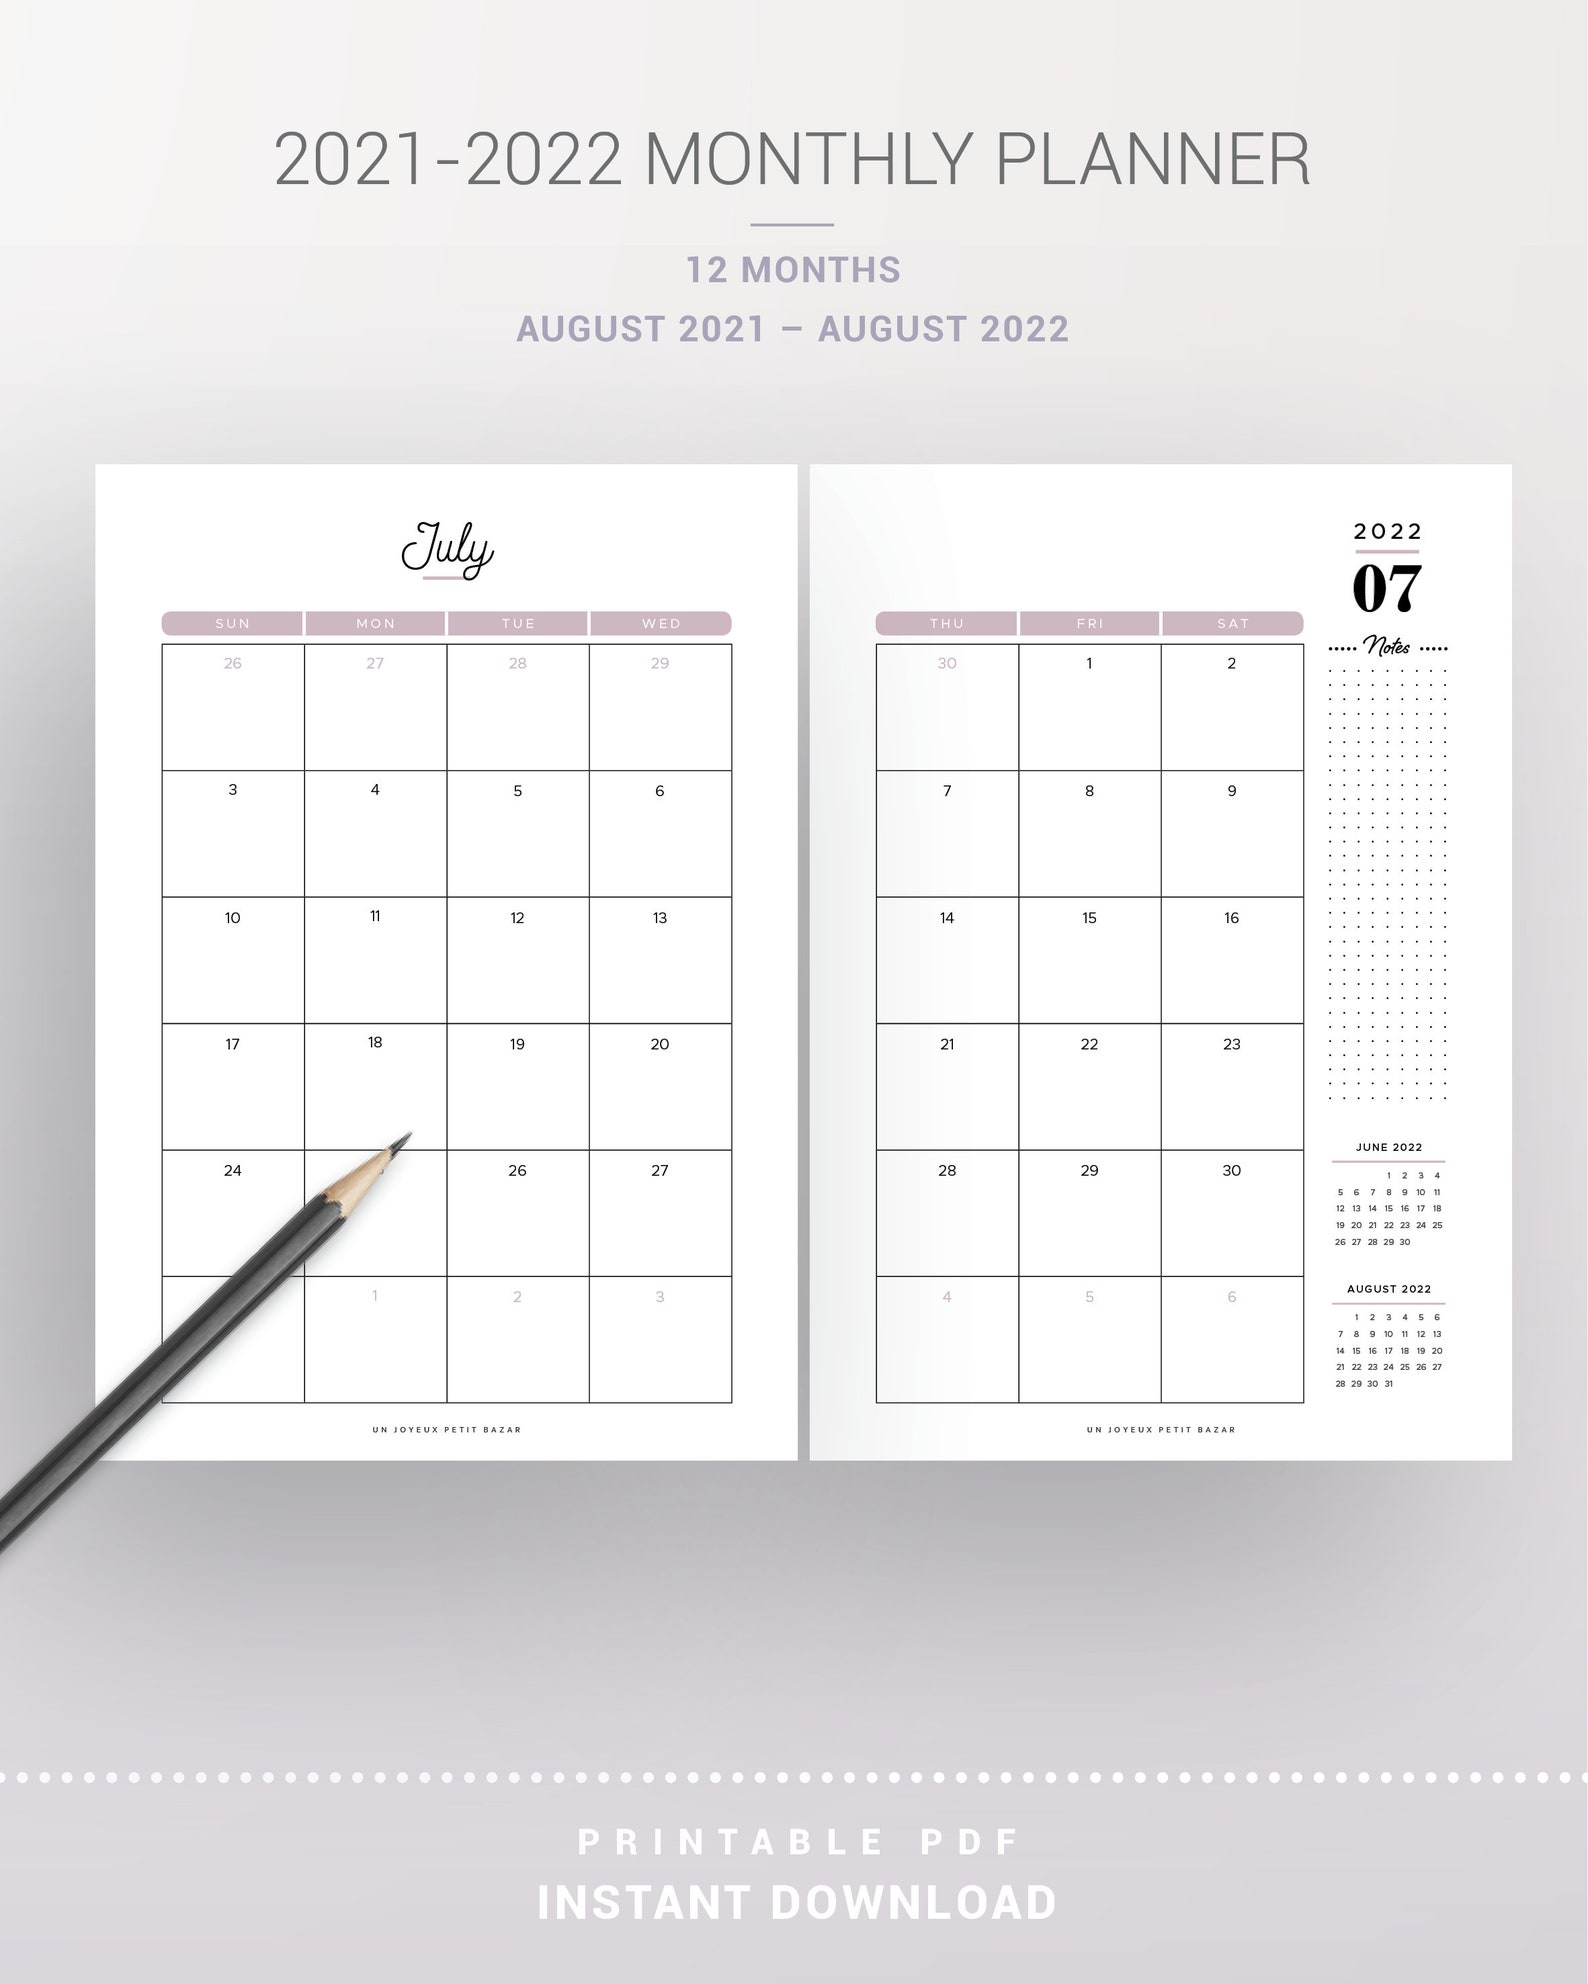 2021 2022 Monthly Planner Printable Monthly Calendar Monday Etsy